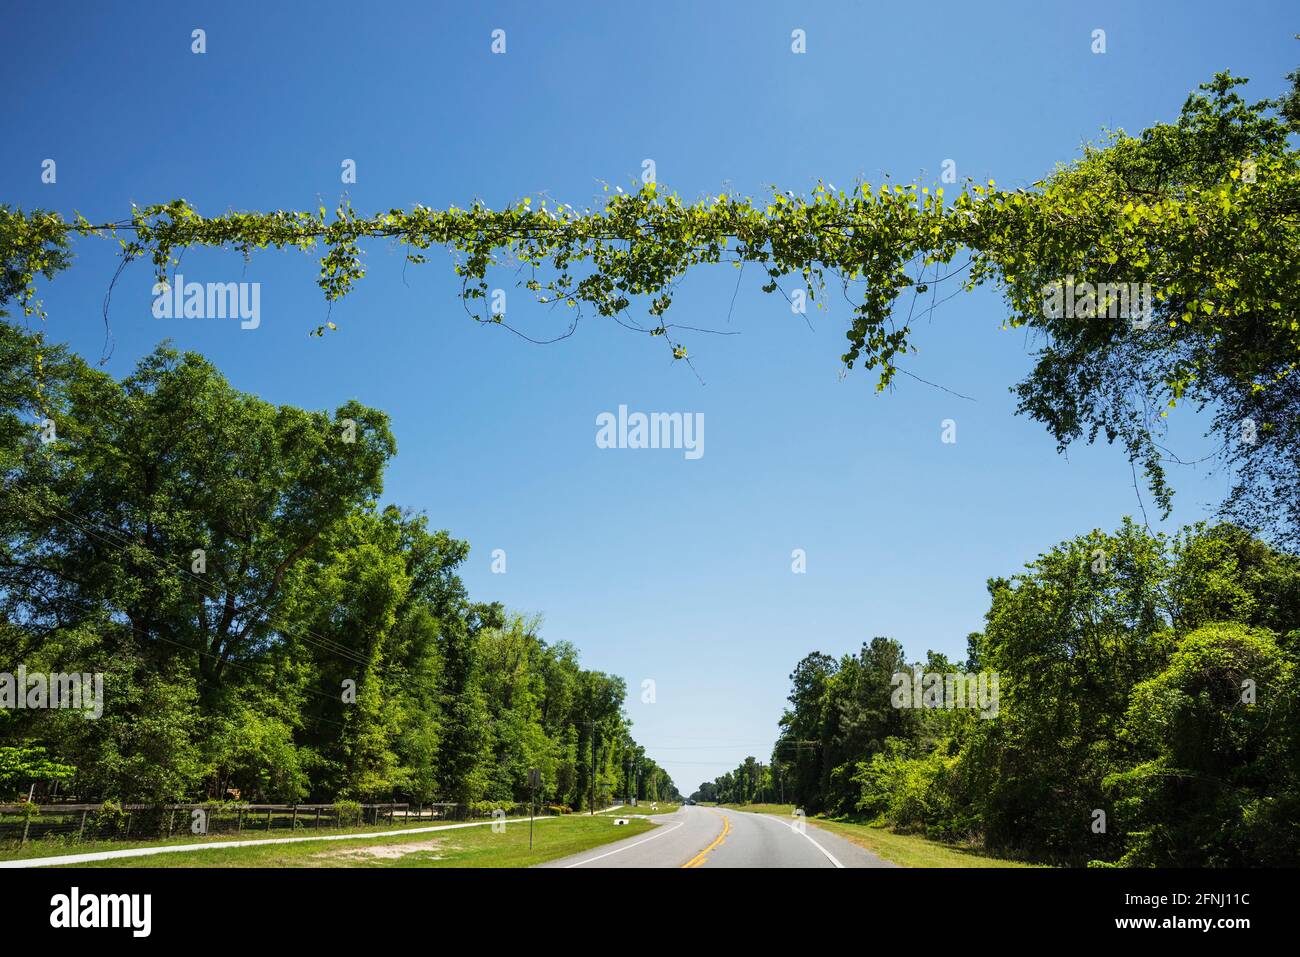 Vine covered electric wires across US Highway 27 in Fort White, Florida, during springtime growth. Stock Photo